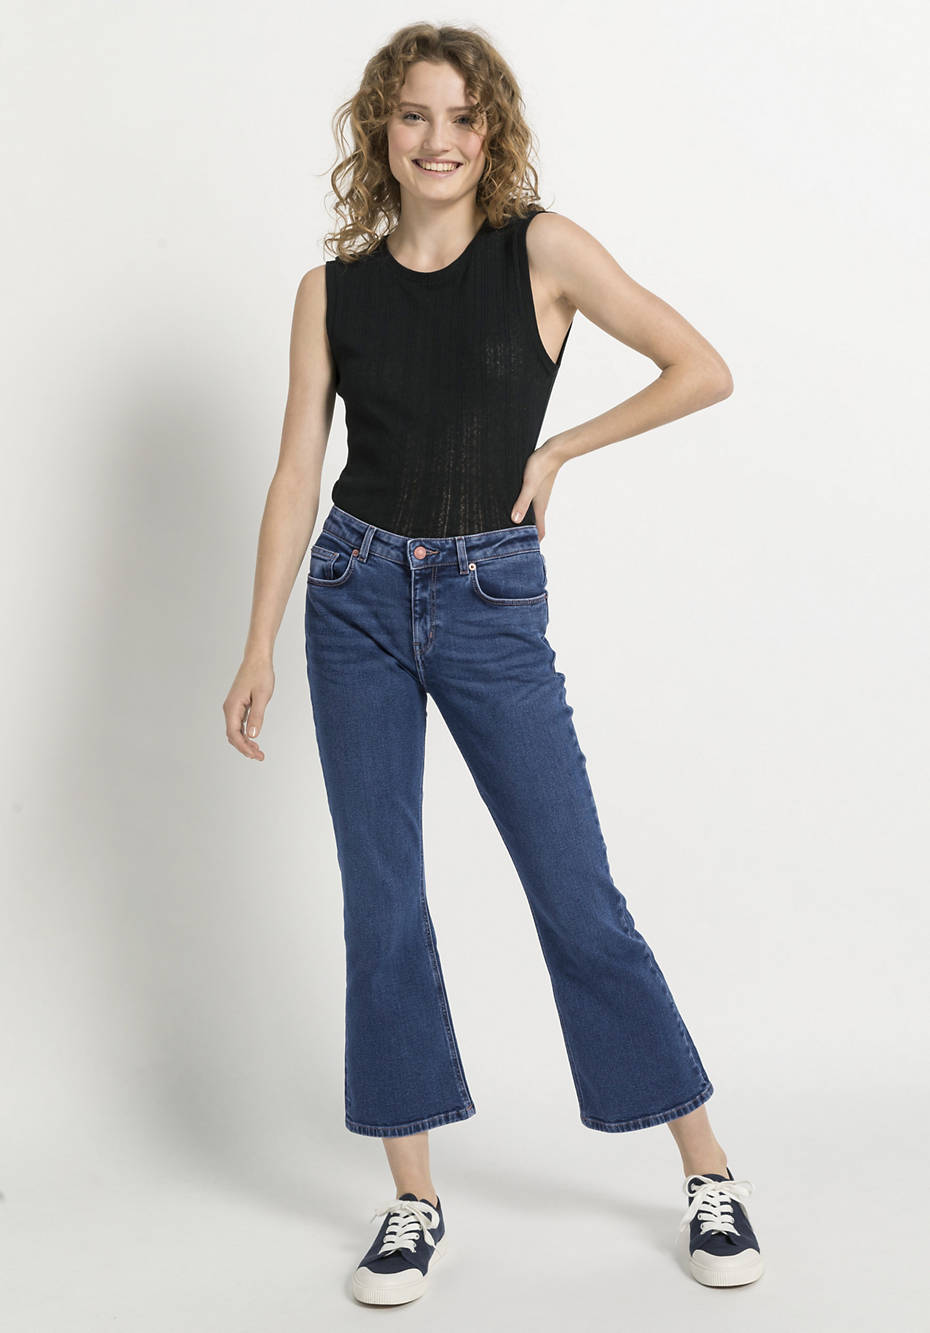 Flared jeans made from BetteRecycling organic denim